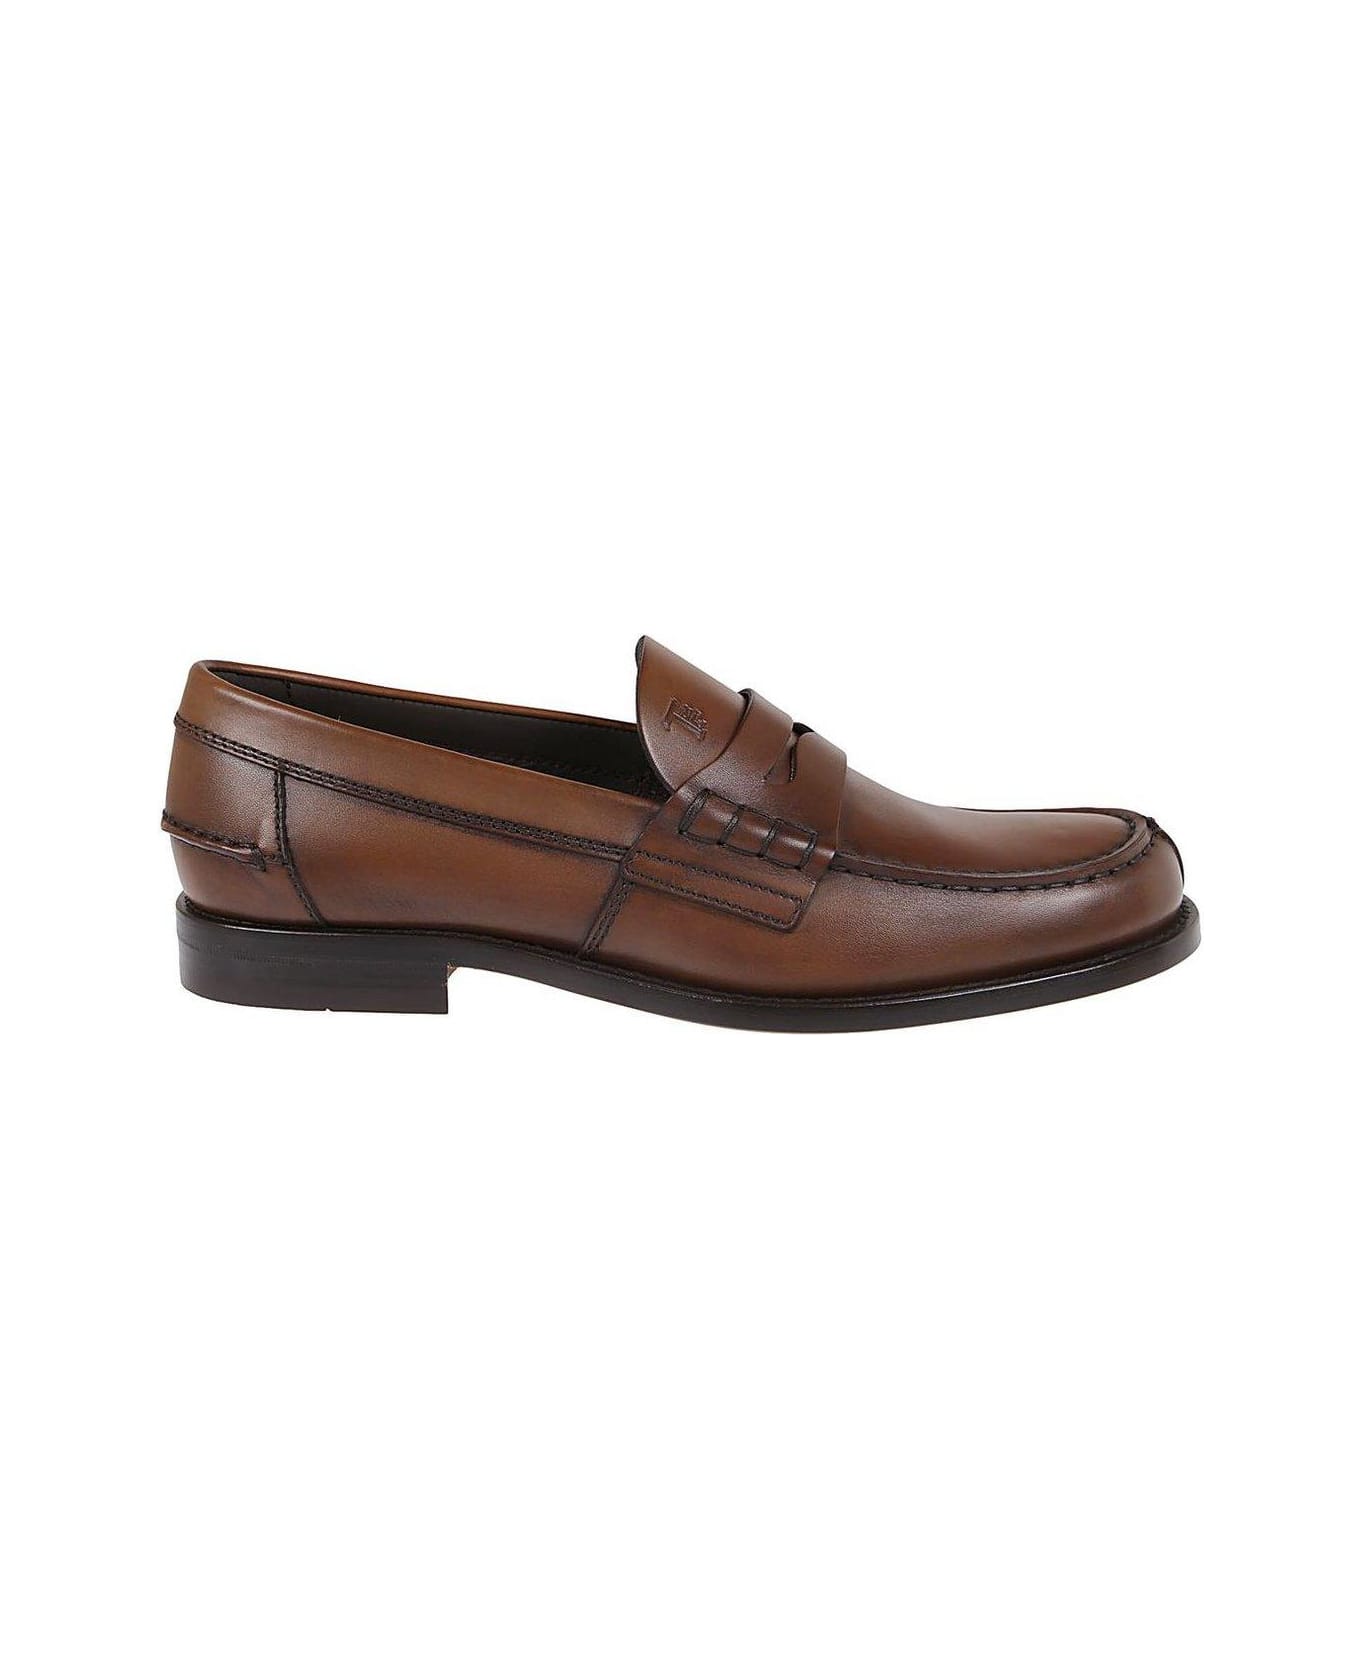 Tod's Penny Bar Moccasins - Brown ローファー＆デッキシューズ